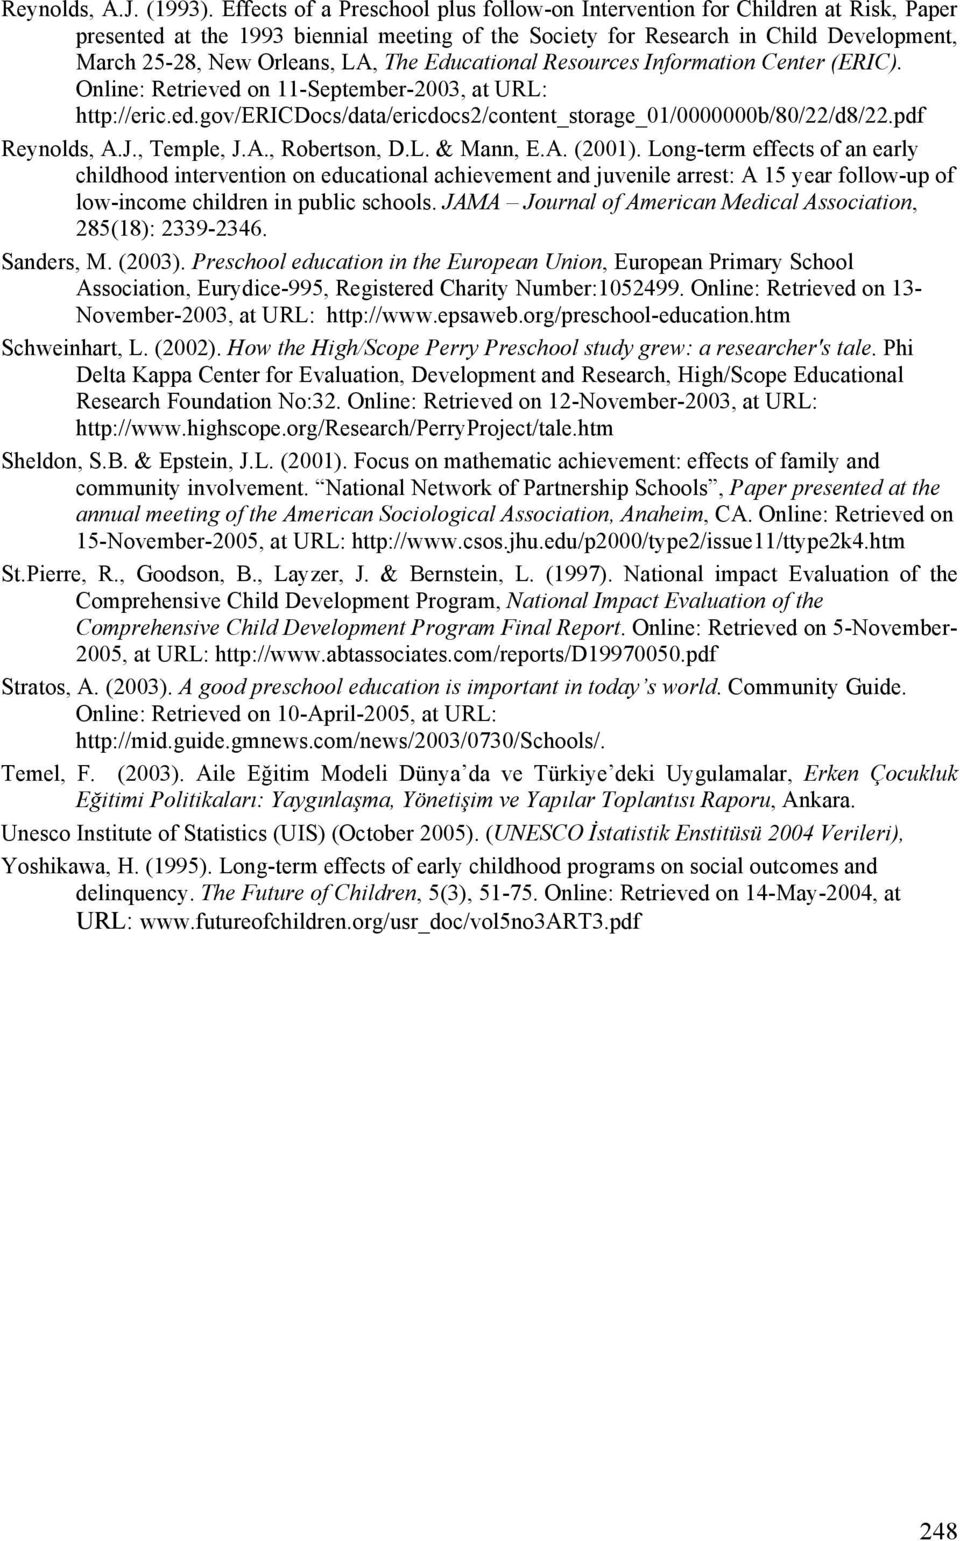 The Educational Resources Information Center (ERIC). Online: Retrieved on 11-September-2003, at URL: http://eric.ed.gov/ericdocs/data/ericdocs2/content_storage_01/0000000b/80/22/d8/22.pdf Reynolds, A.